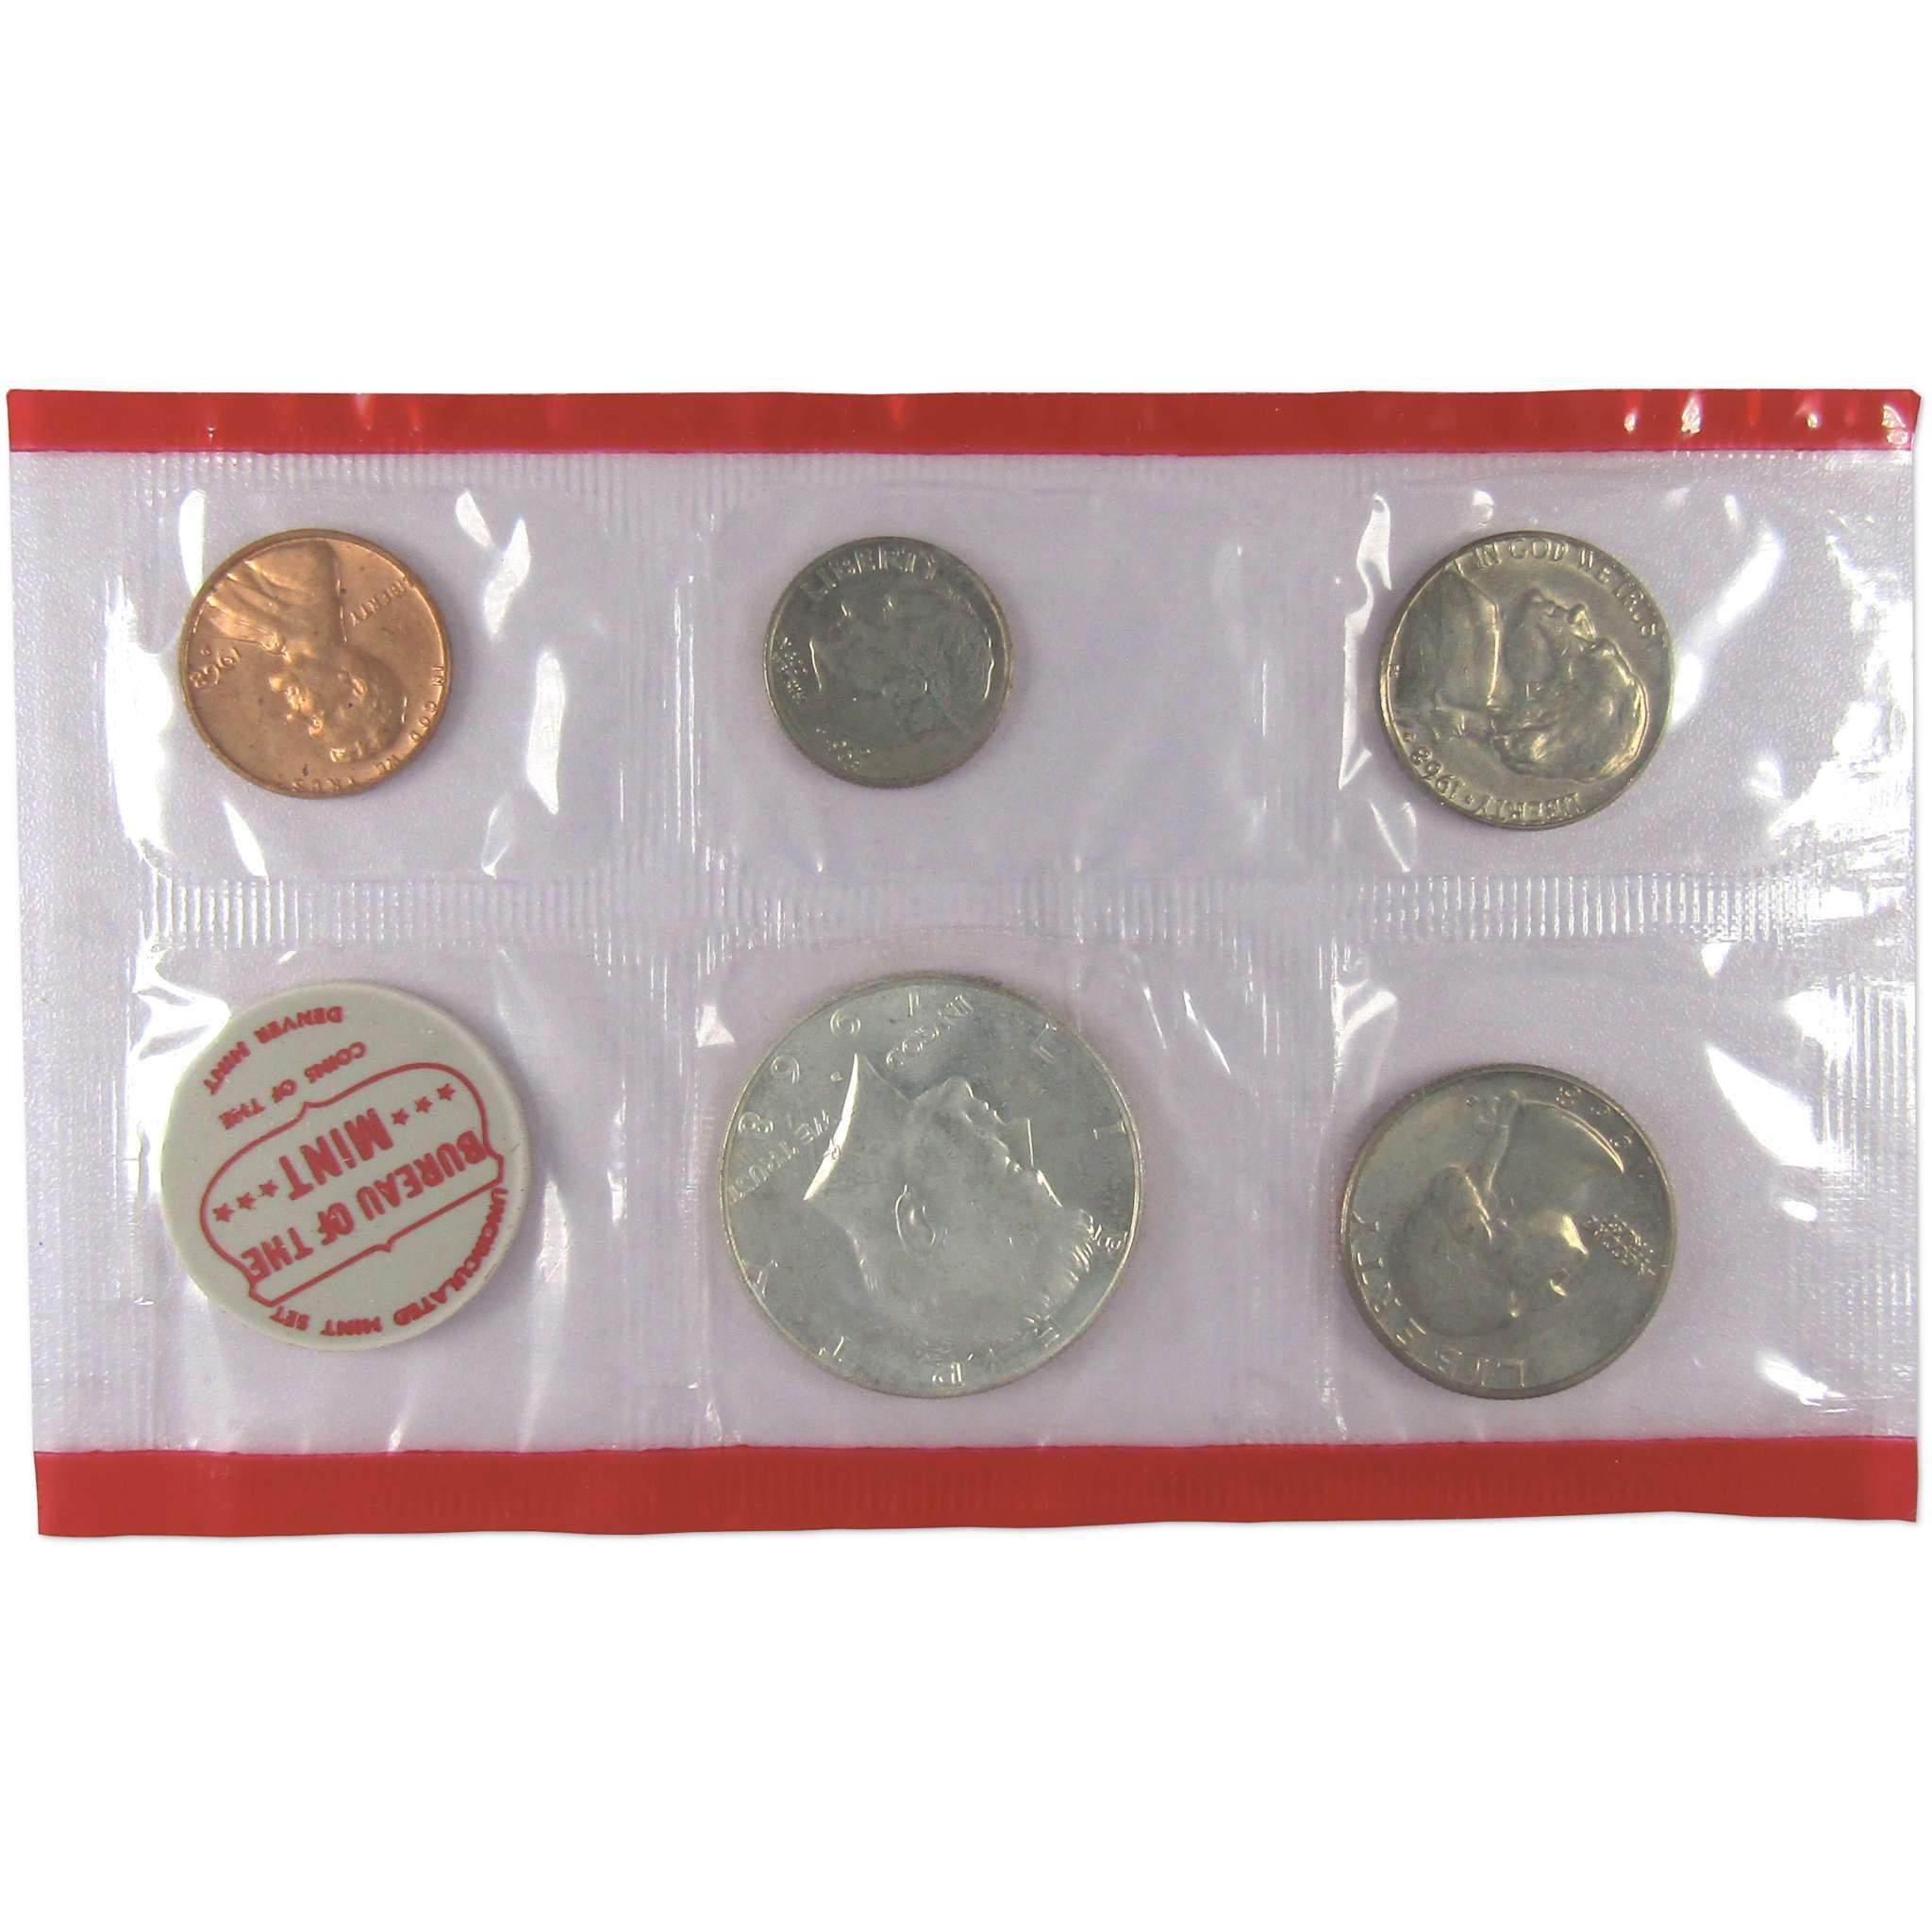 1968 U.S. Mint Set Uncirculated Original Government Packaging OGP Collectible